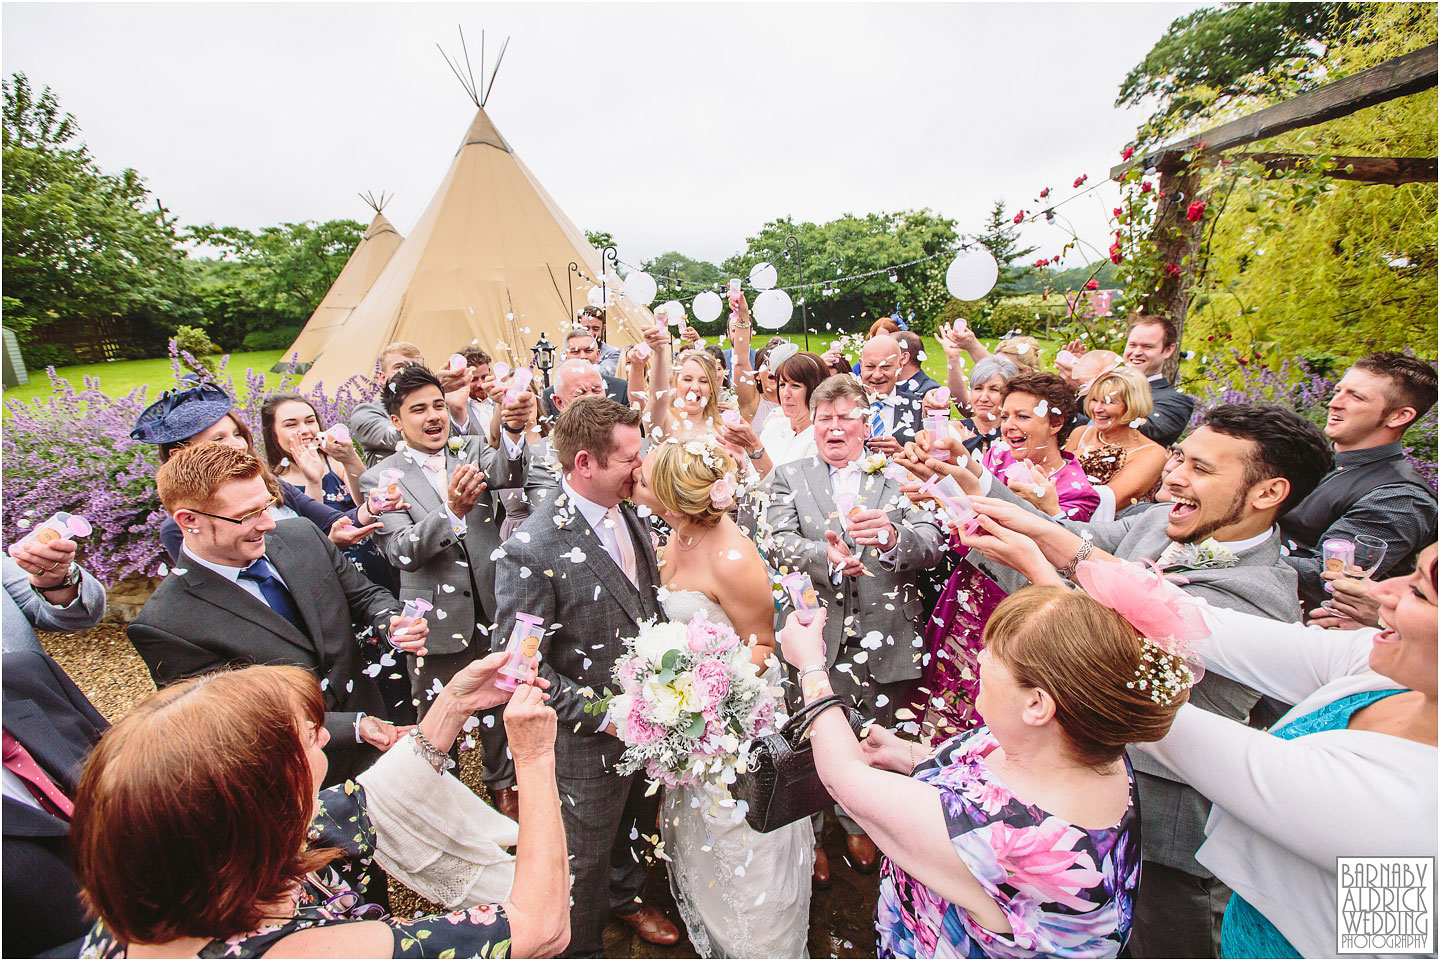 A bride and groom kiss as guests throw pink and white confetti at their wedding at The Star Inn in Harome near Helmsley in North Yorkshire